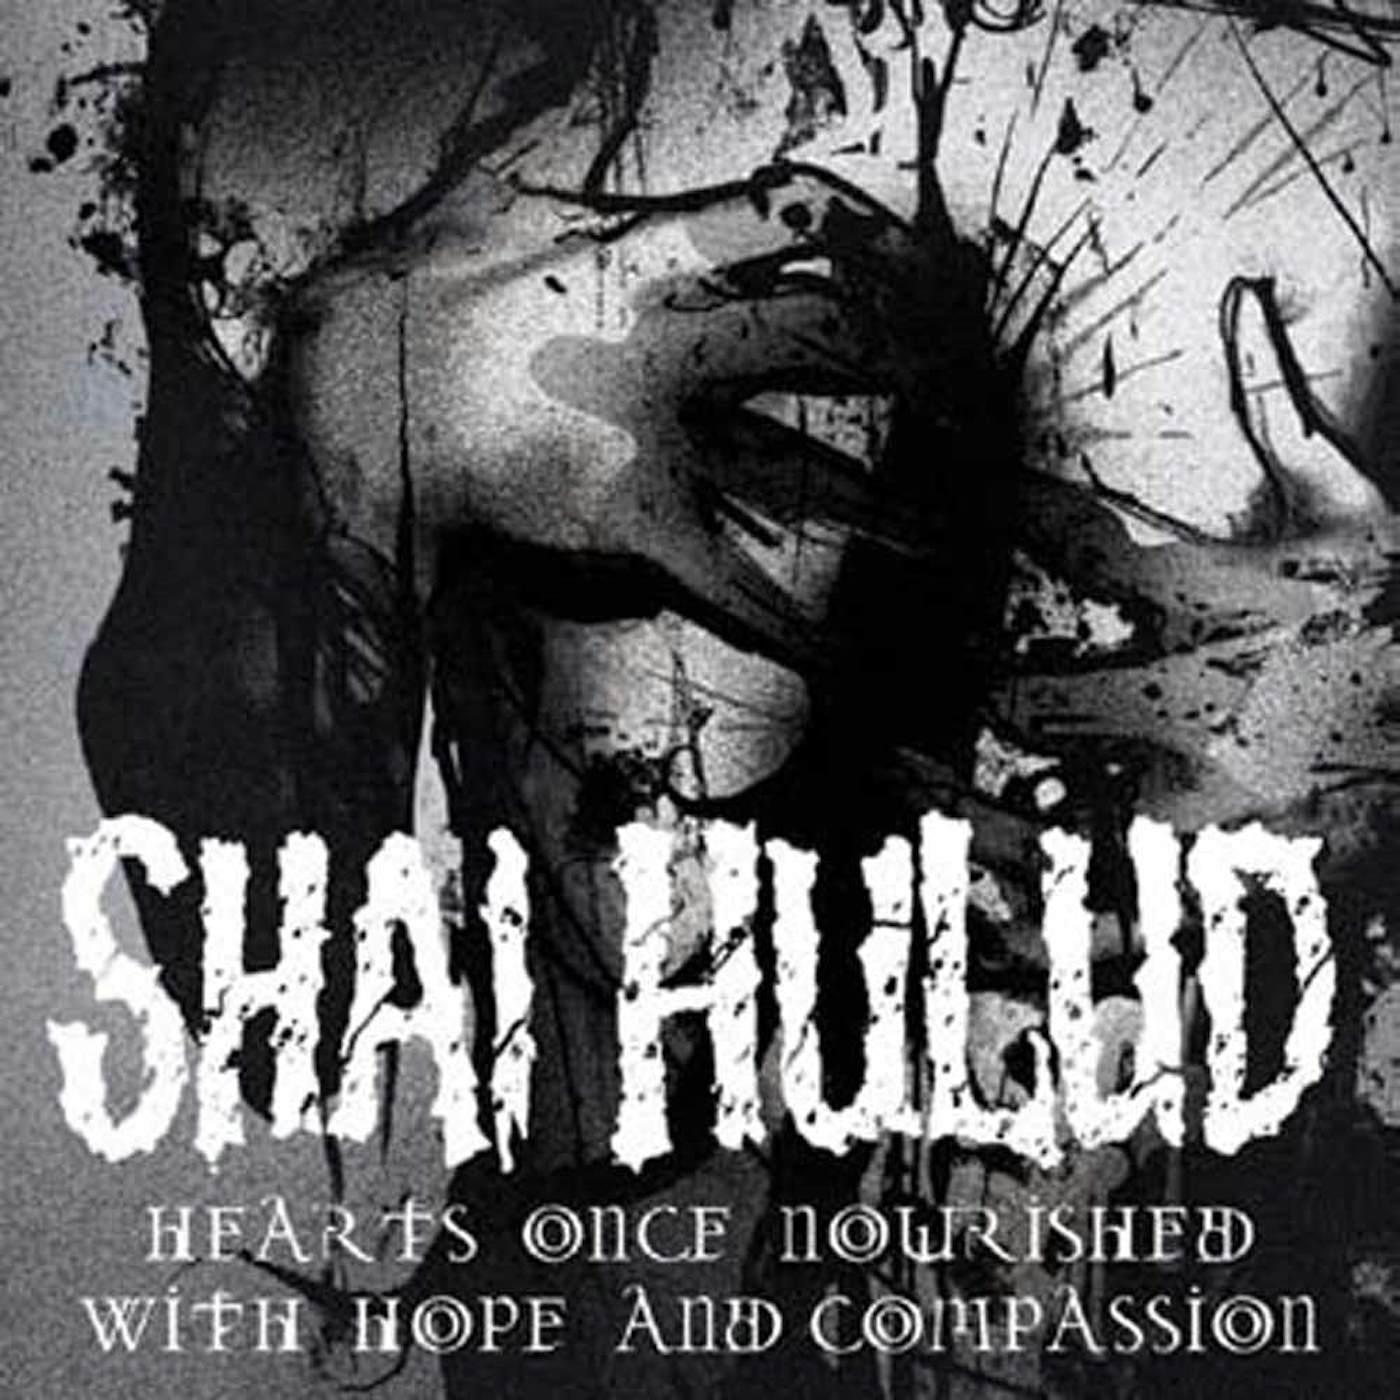  Shai Hulud LP - Hearts Once Nourished With Hope And Compassion (Turquoise Vinyl)